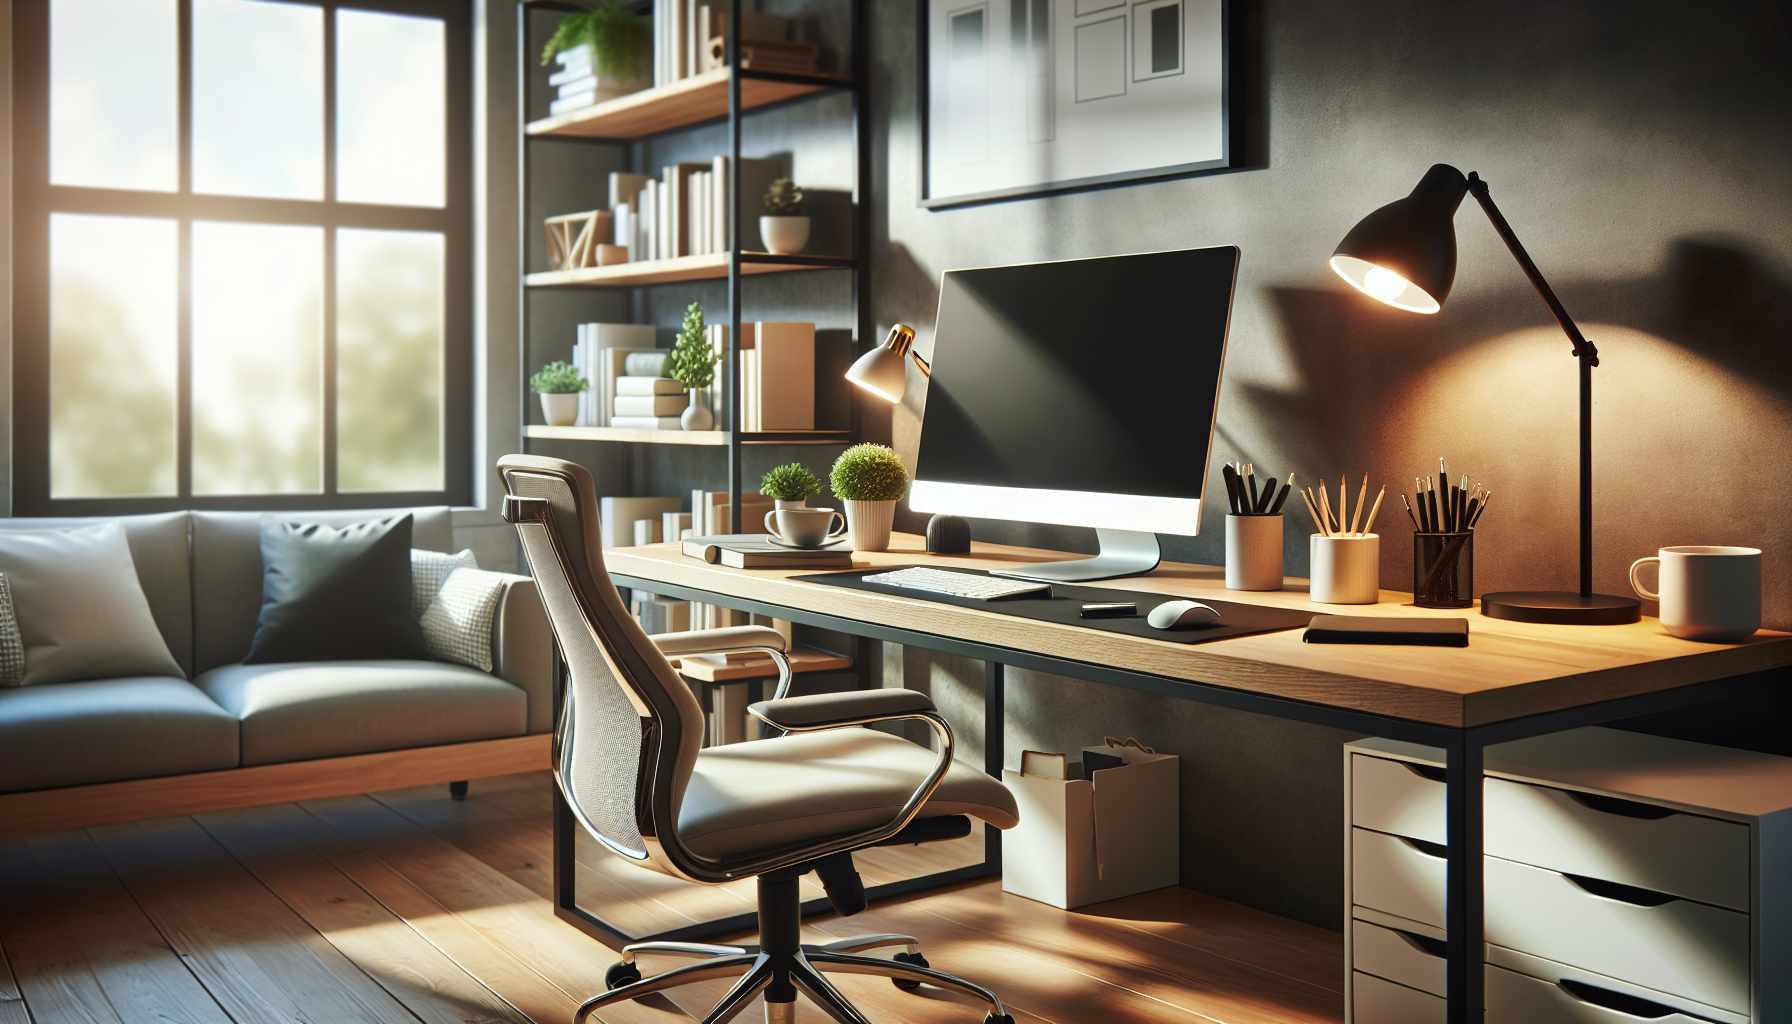 Guidance on home office setup and ergonomics for remote employees